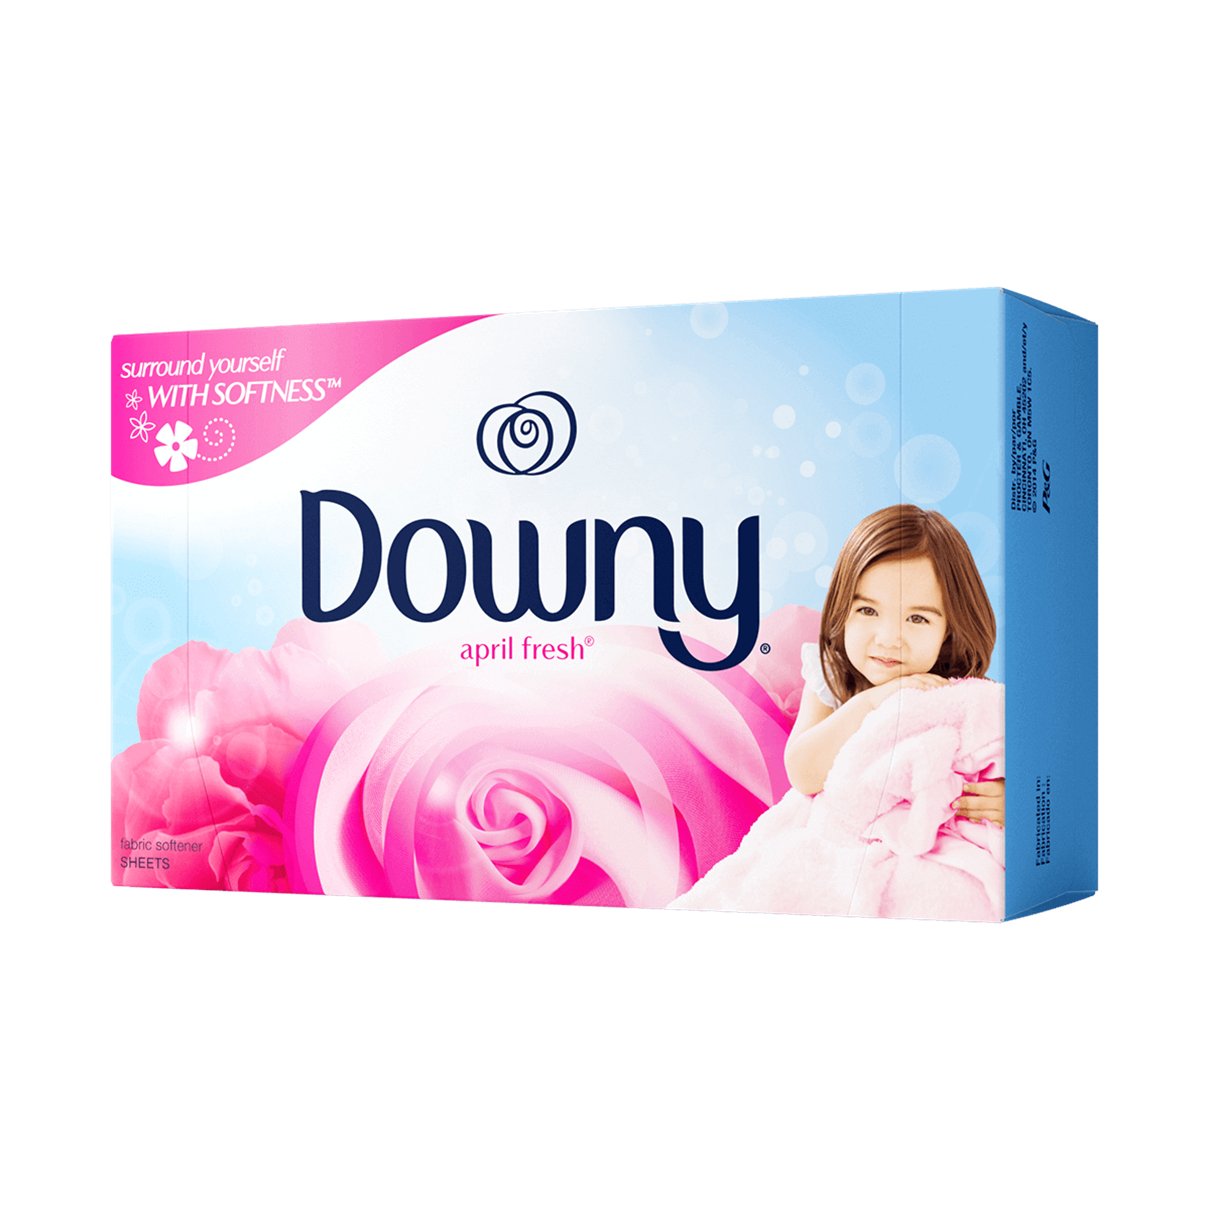 Downy - Dryer Sheets, April Fresh - Case of 12